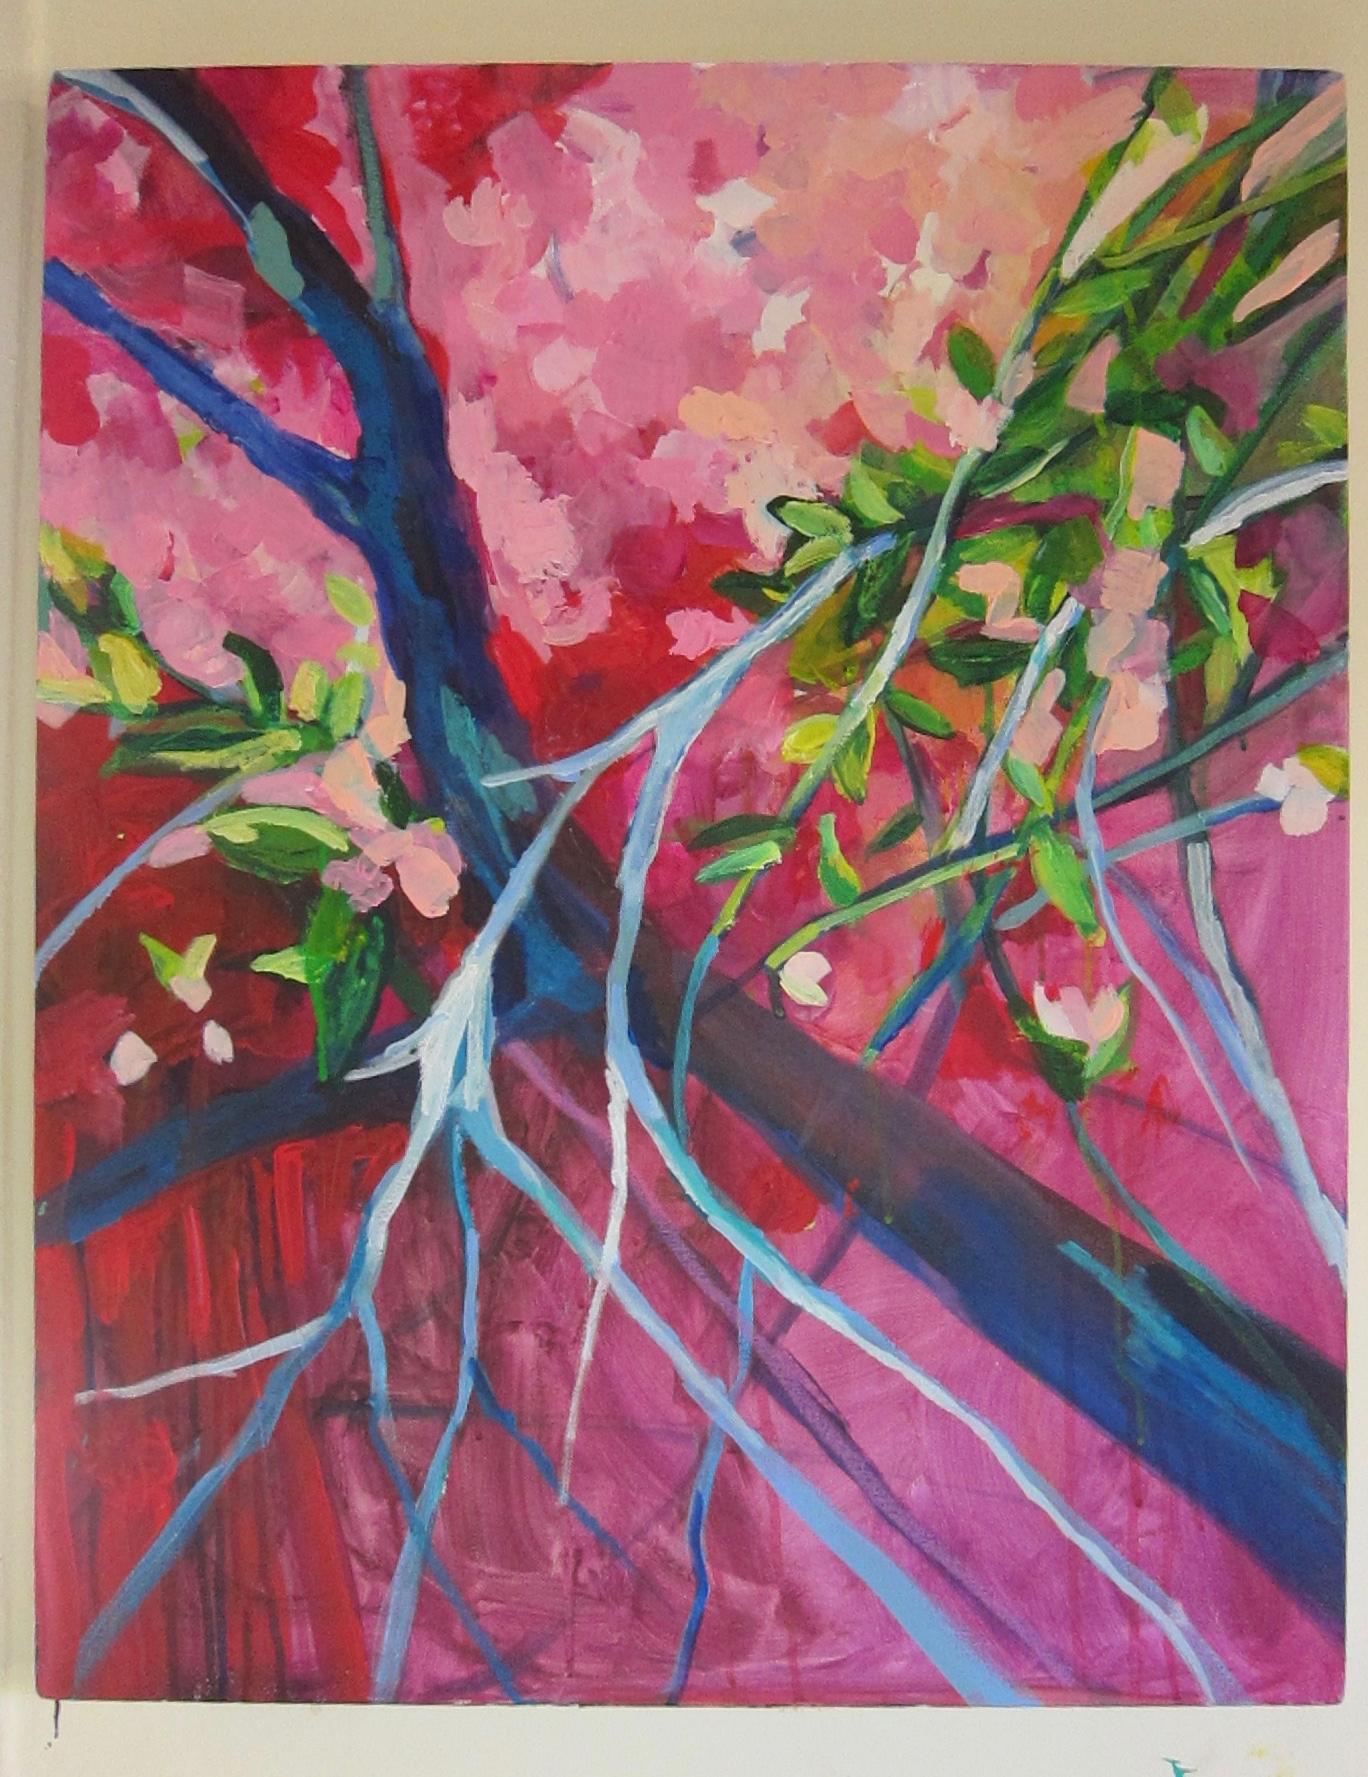 Medley of Blossoms - Abstract Impressionist Painting by Colette Wirz Nauke